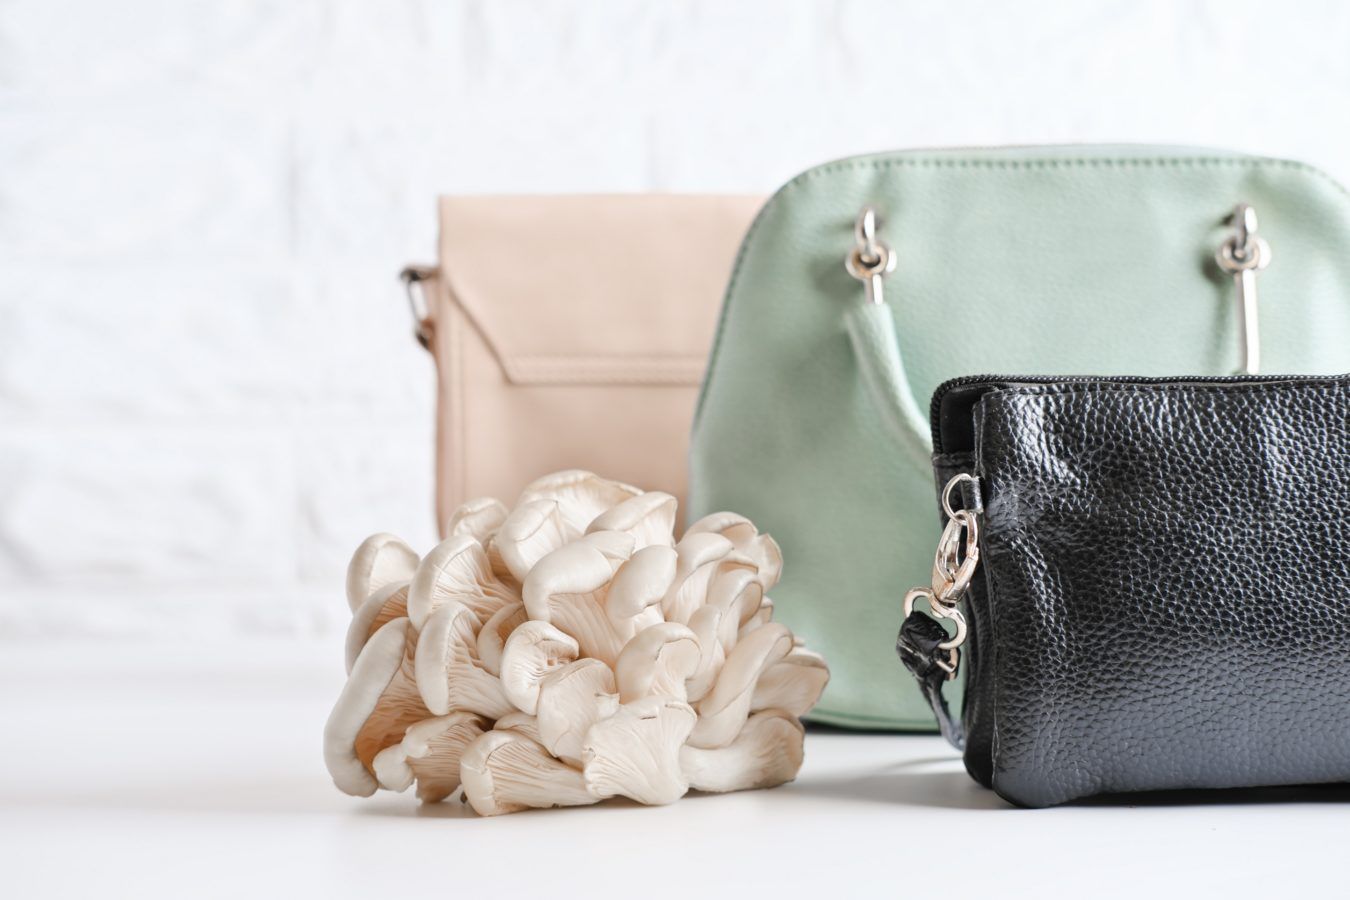 The latest on-trend ethical and sustainable alternative to animal leather comes from mushrooms